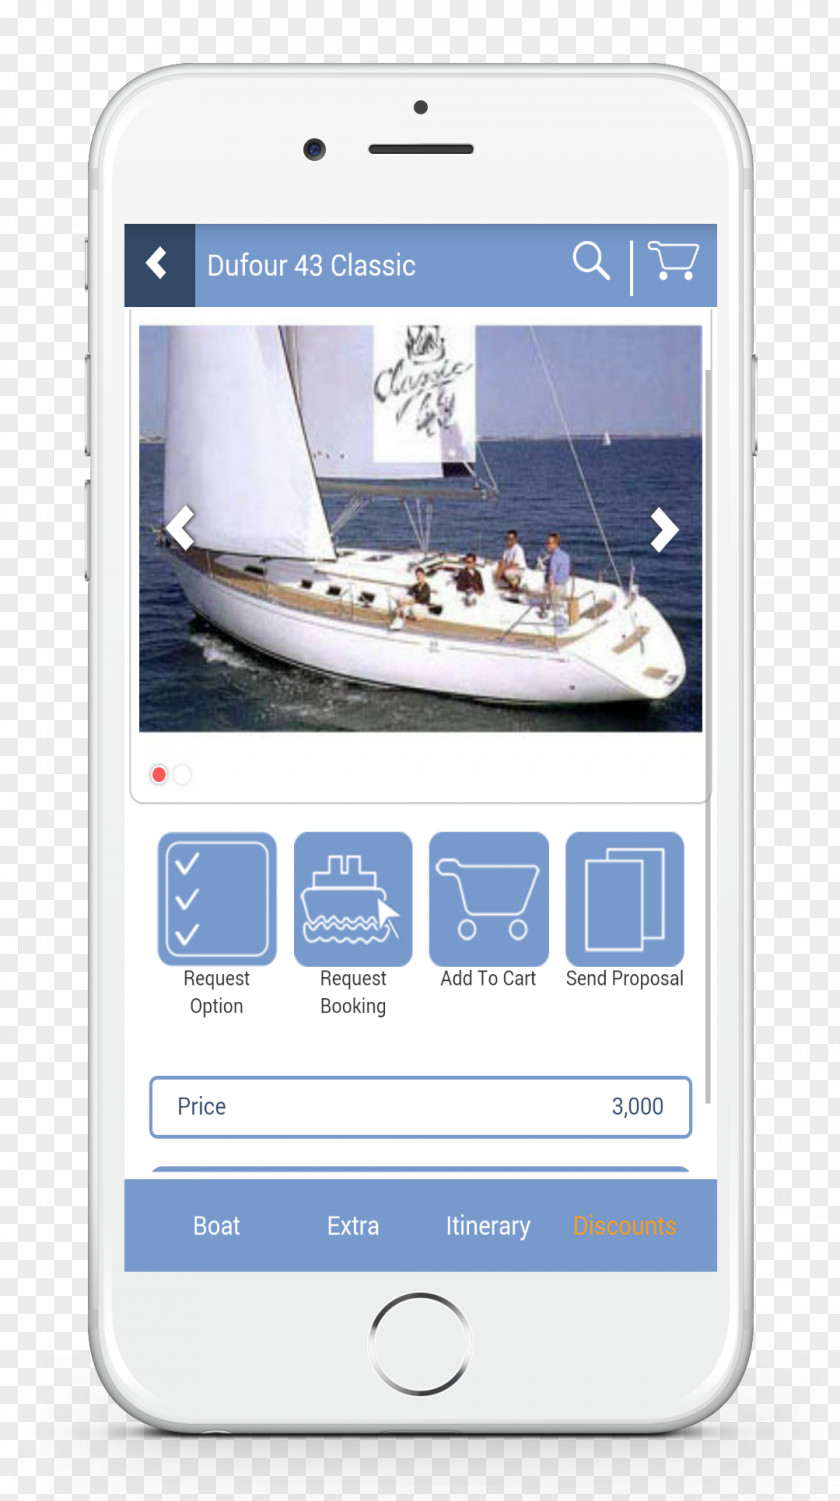 Request For Proposal Button Feature Phone Smartphone Handheld Devices Multimedia Dufour Yachts PNG